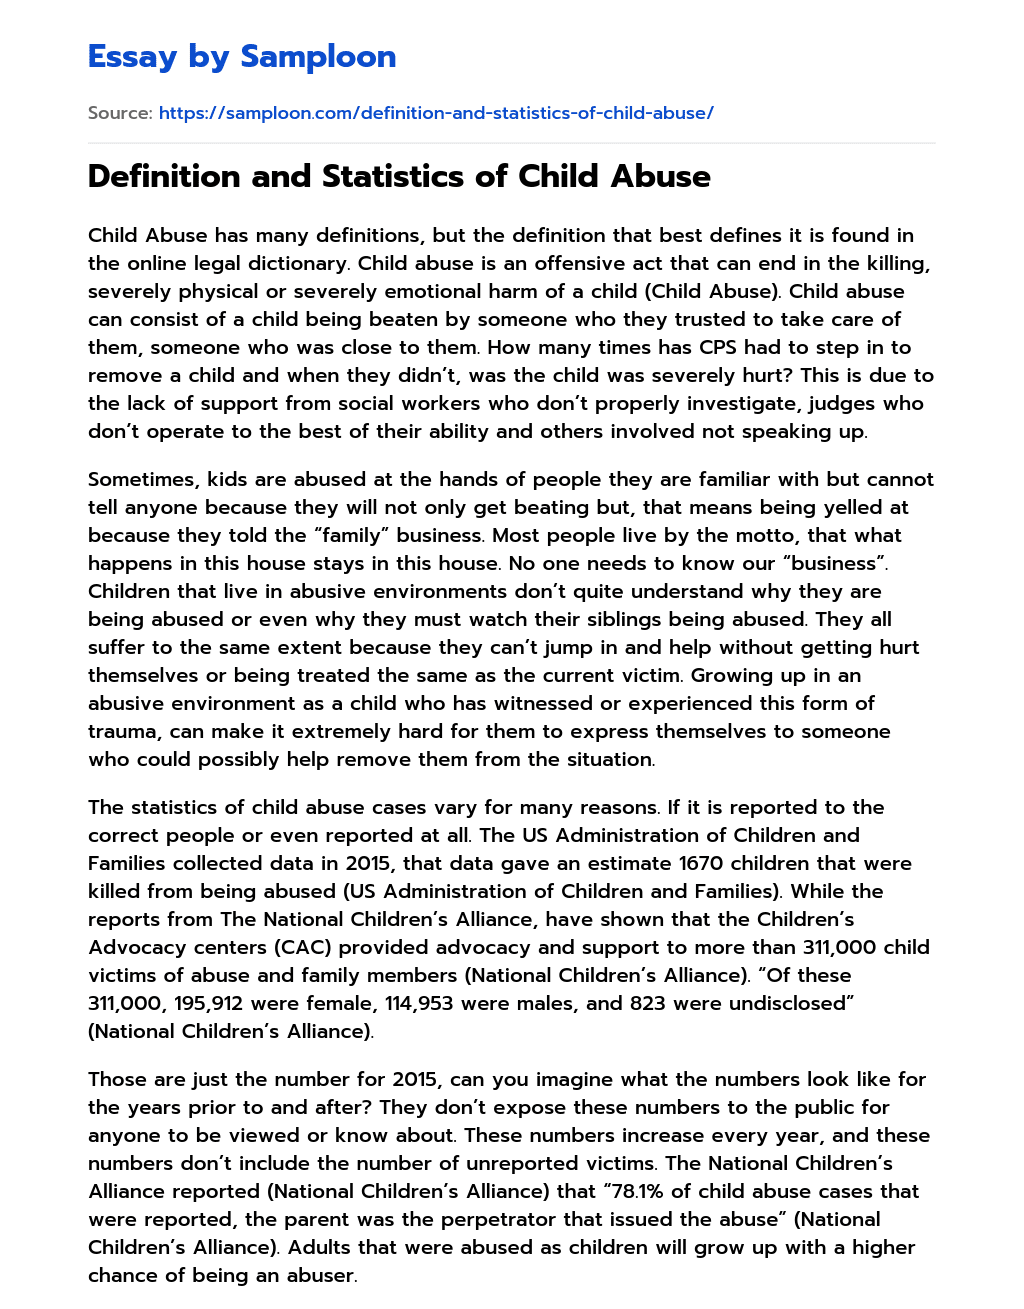 Definition and Statistics of Child Abuse essay